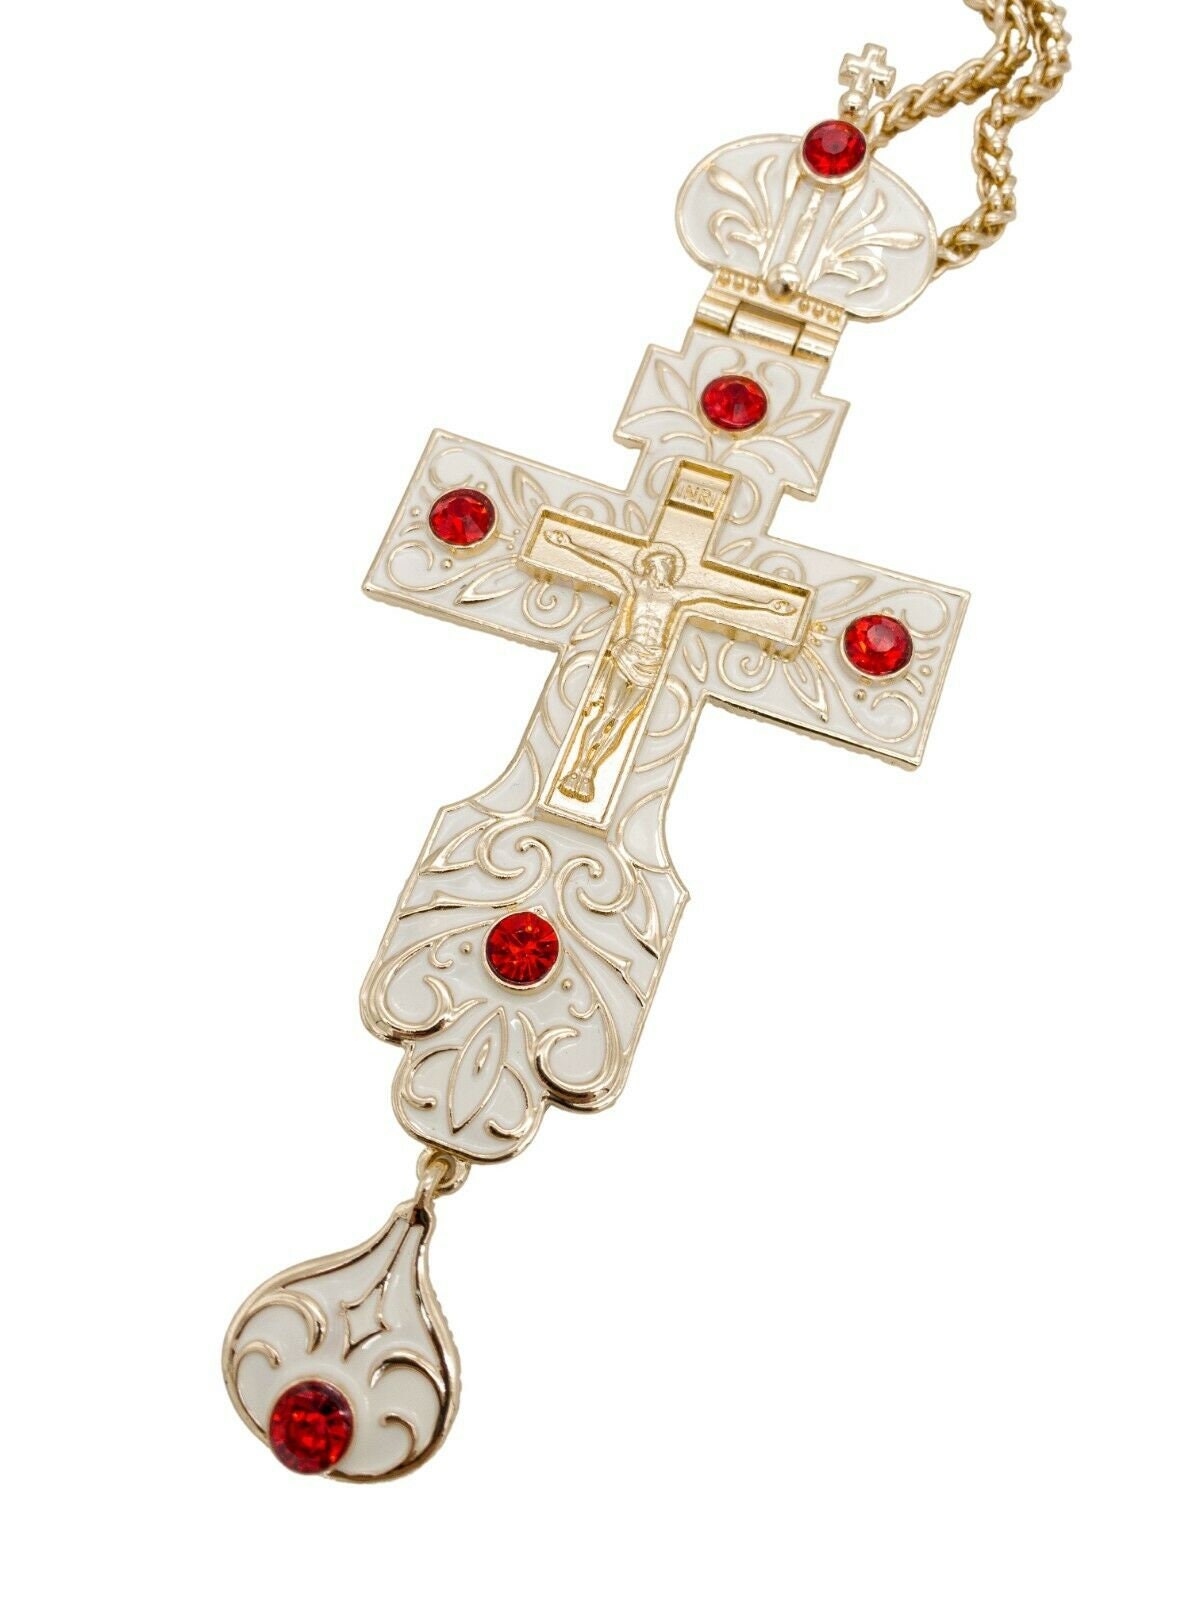 Buy Chi Rho Clergy Pectoral Cross for Sale | Silver Cross Clergy Pendants |  Silver Crosses for Clergy -Shop Religious Supplies